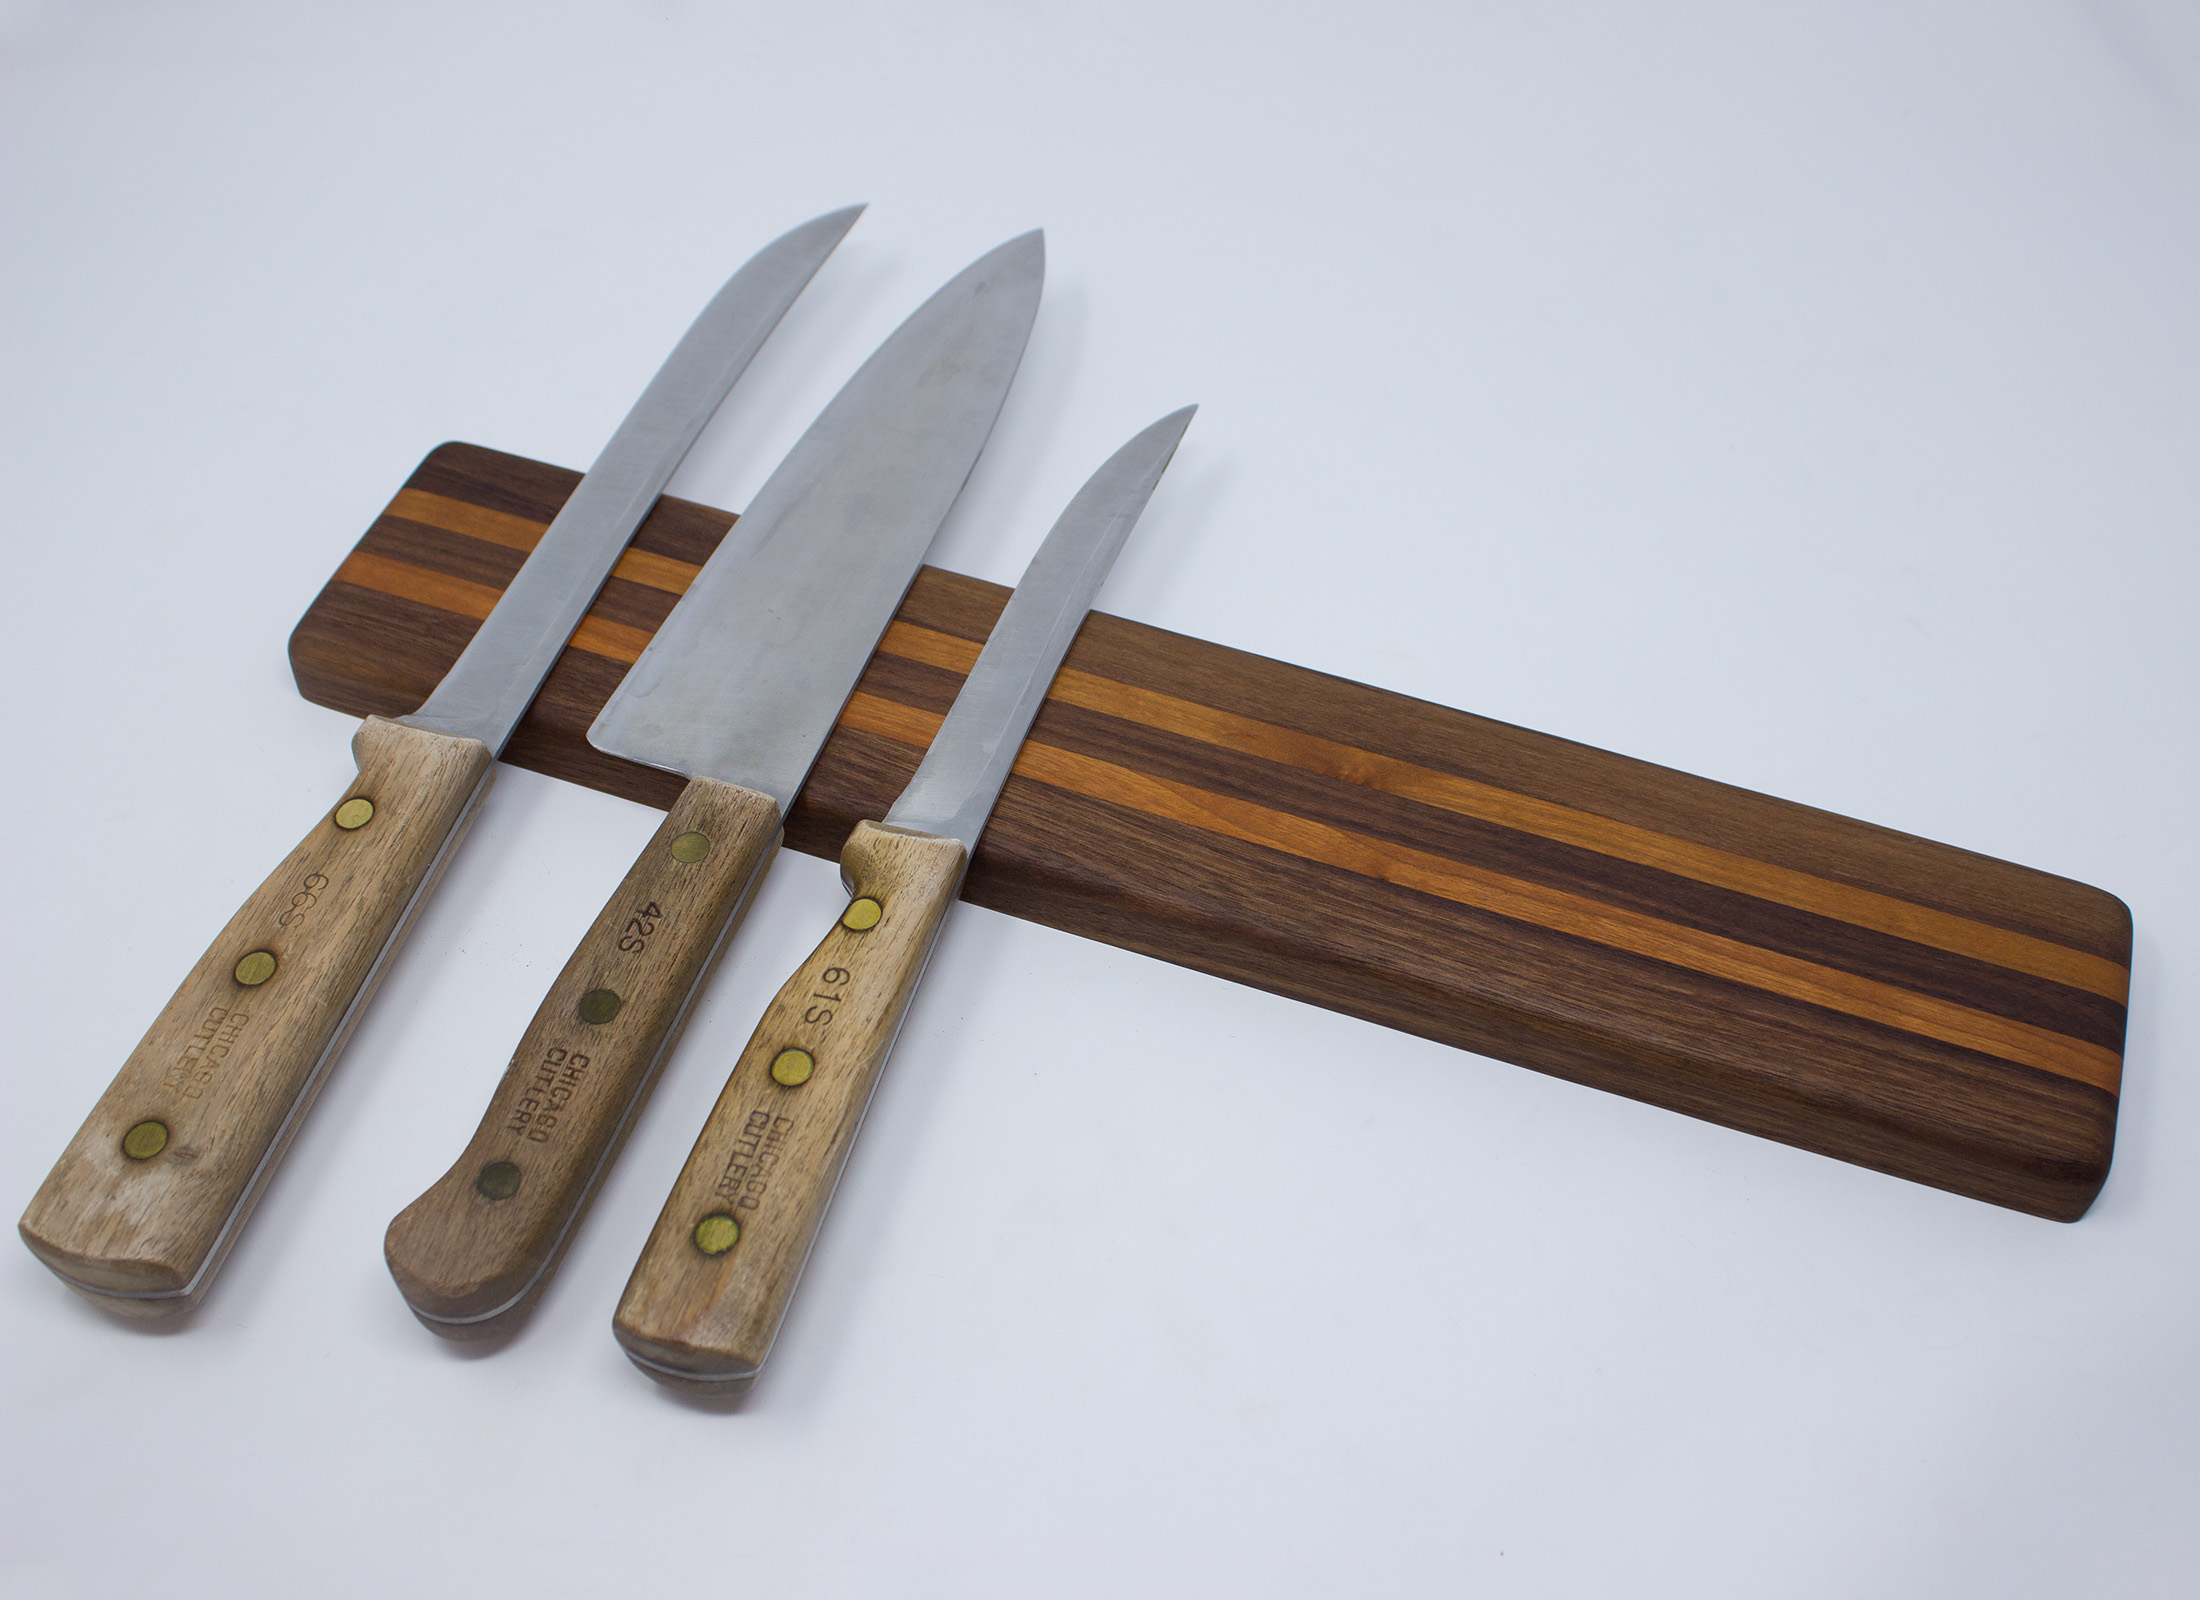 https://www.rockfordwoodcrafts.com/wp-content/uploads/Walnut-and-Cherry-Striped-Magnetic-Knife-Holder-Front-Angled-with-Knives.jpg